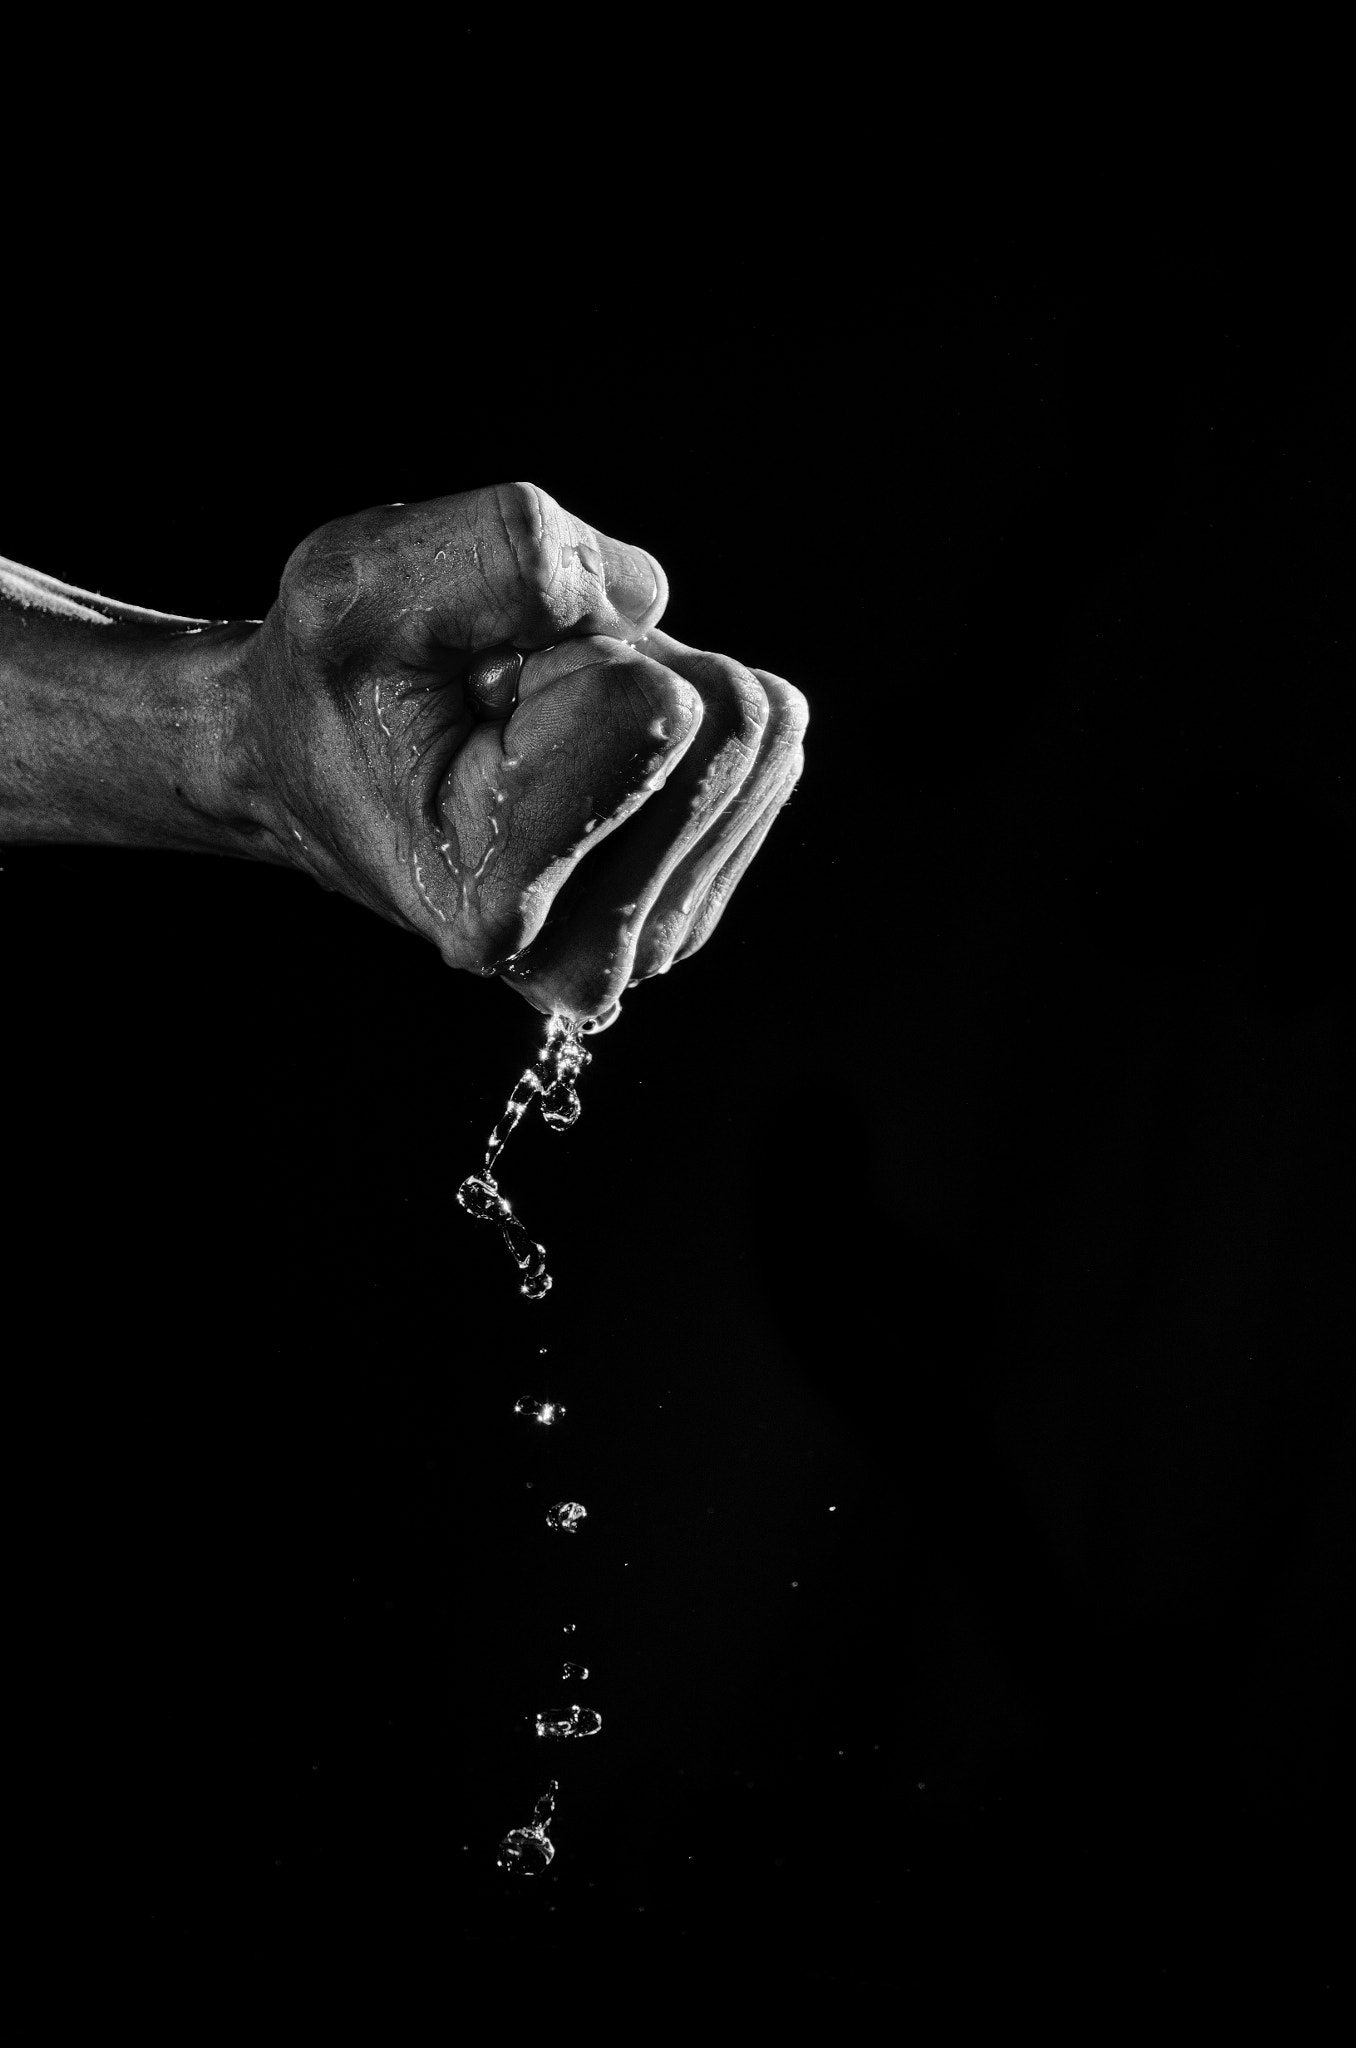 Nikon D5100 + Nikon AF-S DX Nikkor 16-85mm F3.5-5.6G ED VR sample photo. Clean water flows out of the hand clenched into a fist. photography